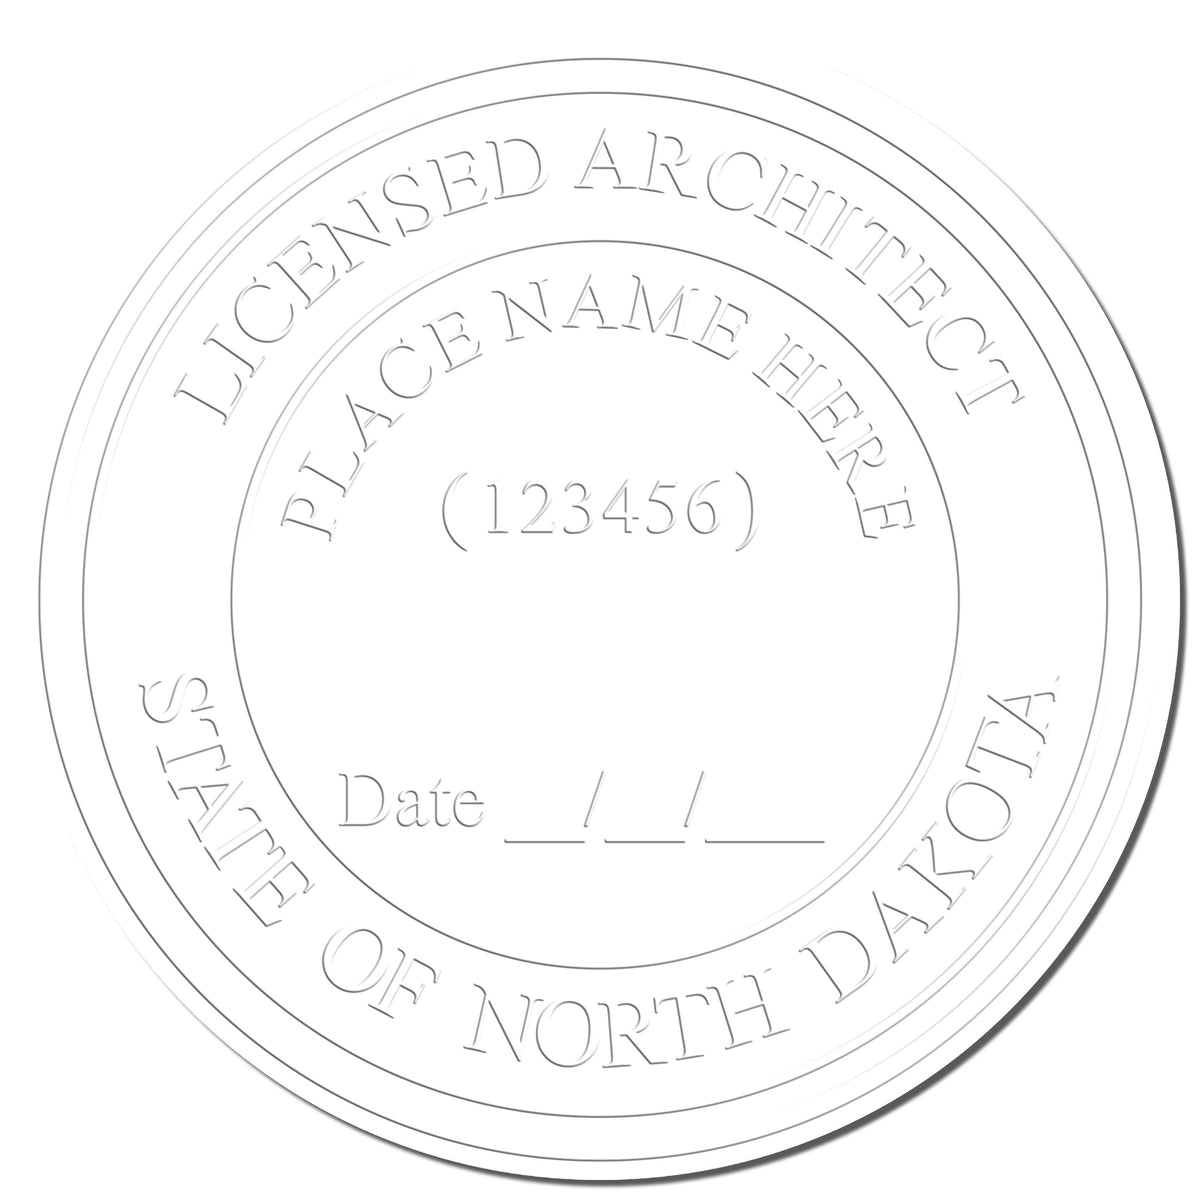 This paper is stamped with a sample imprint of the State of North Dakota Architectural Seal Embosser, signifying its quality and reliability.